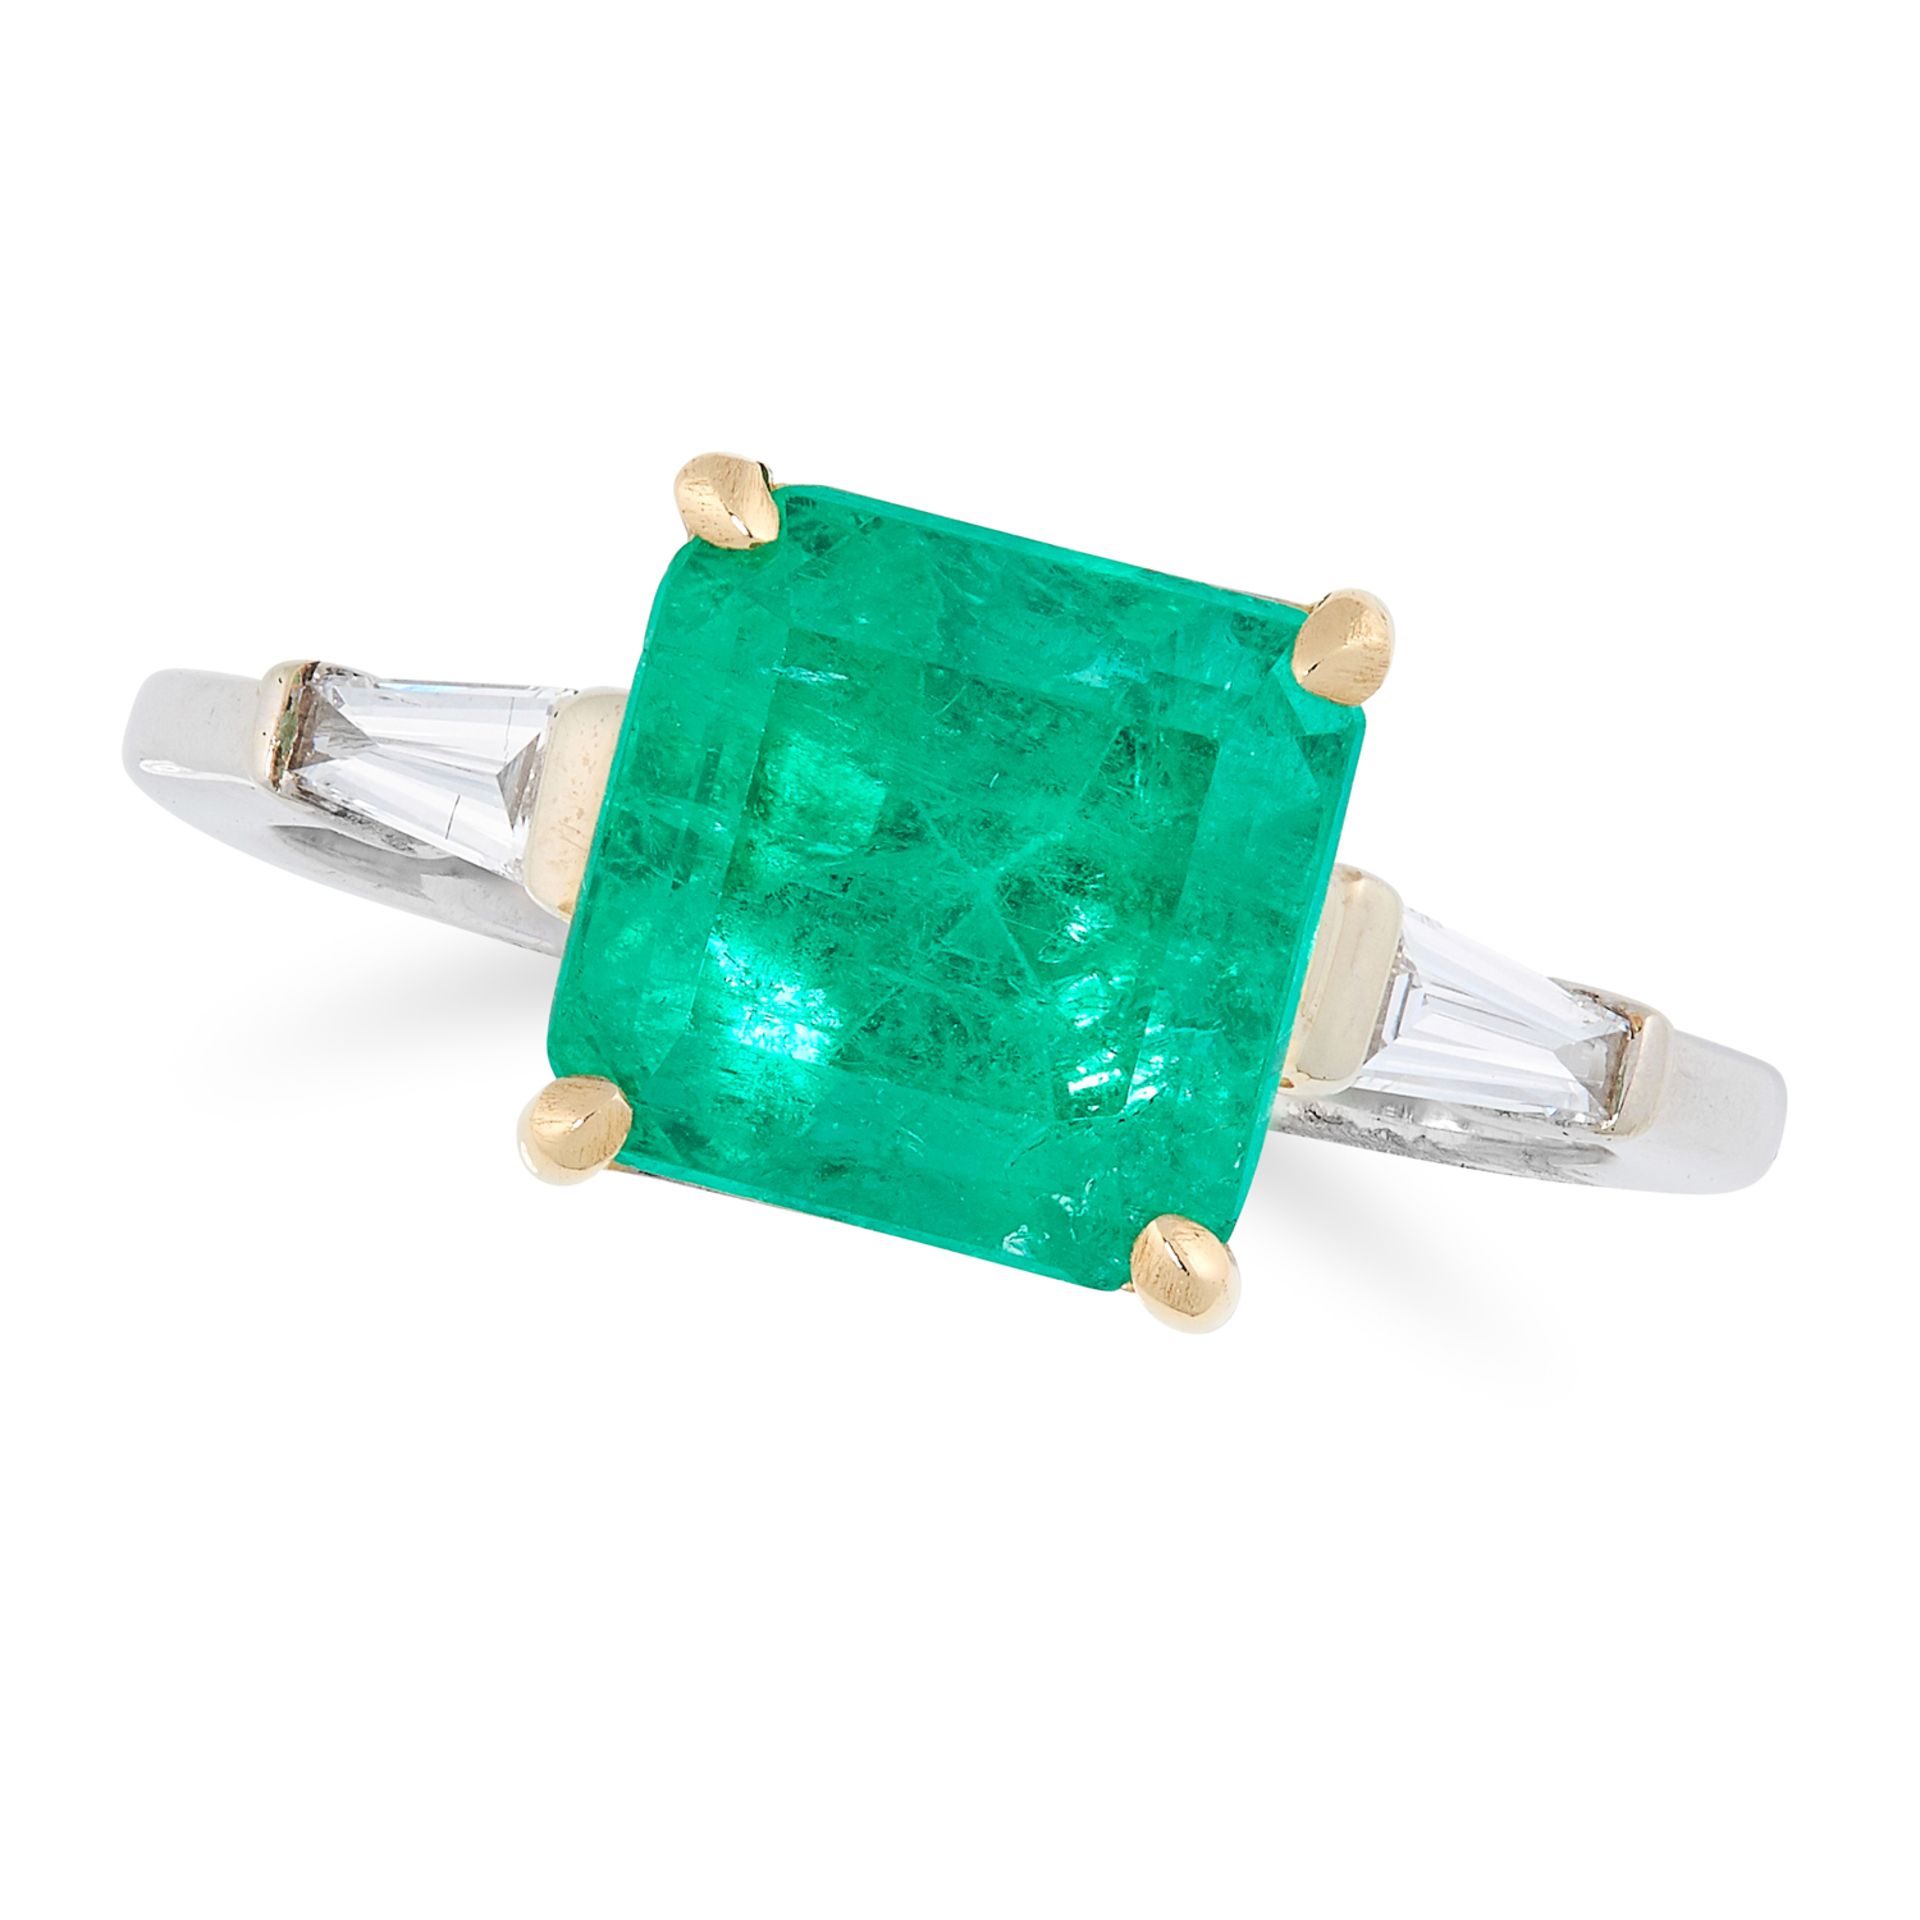 AN EMERALD AND DIAMOND RING in 18ct white gold, set with an emerald cut emerald of approximately